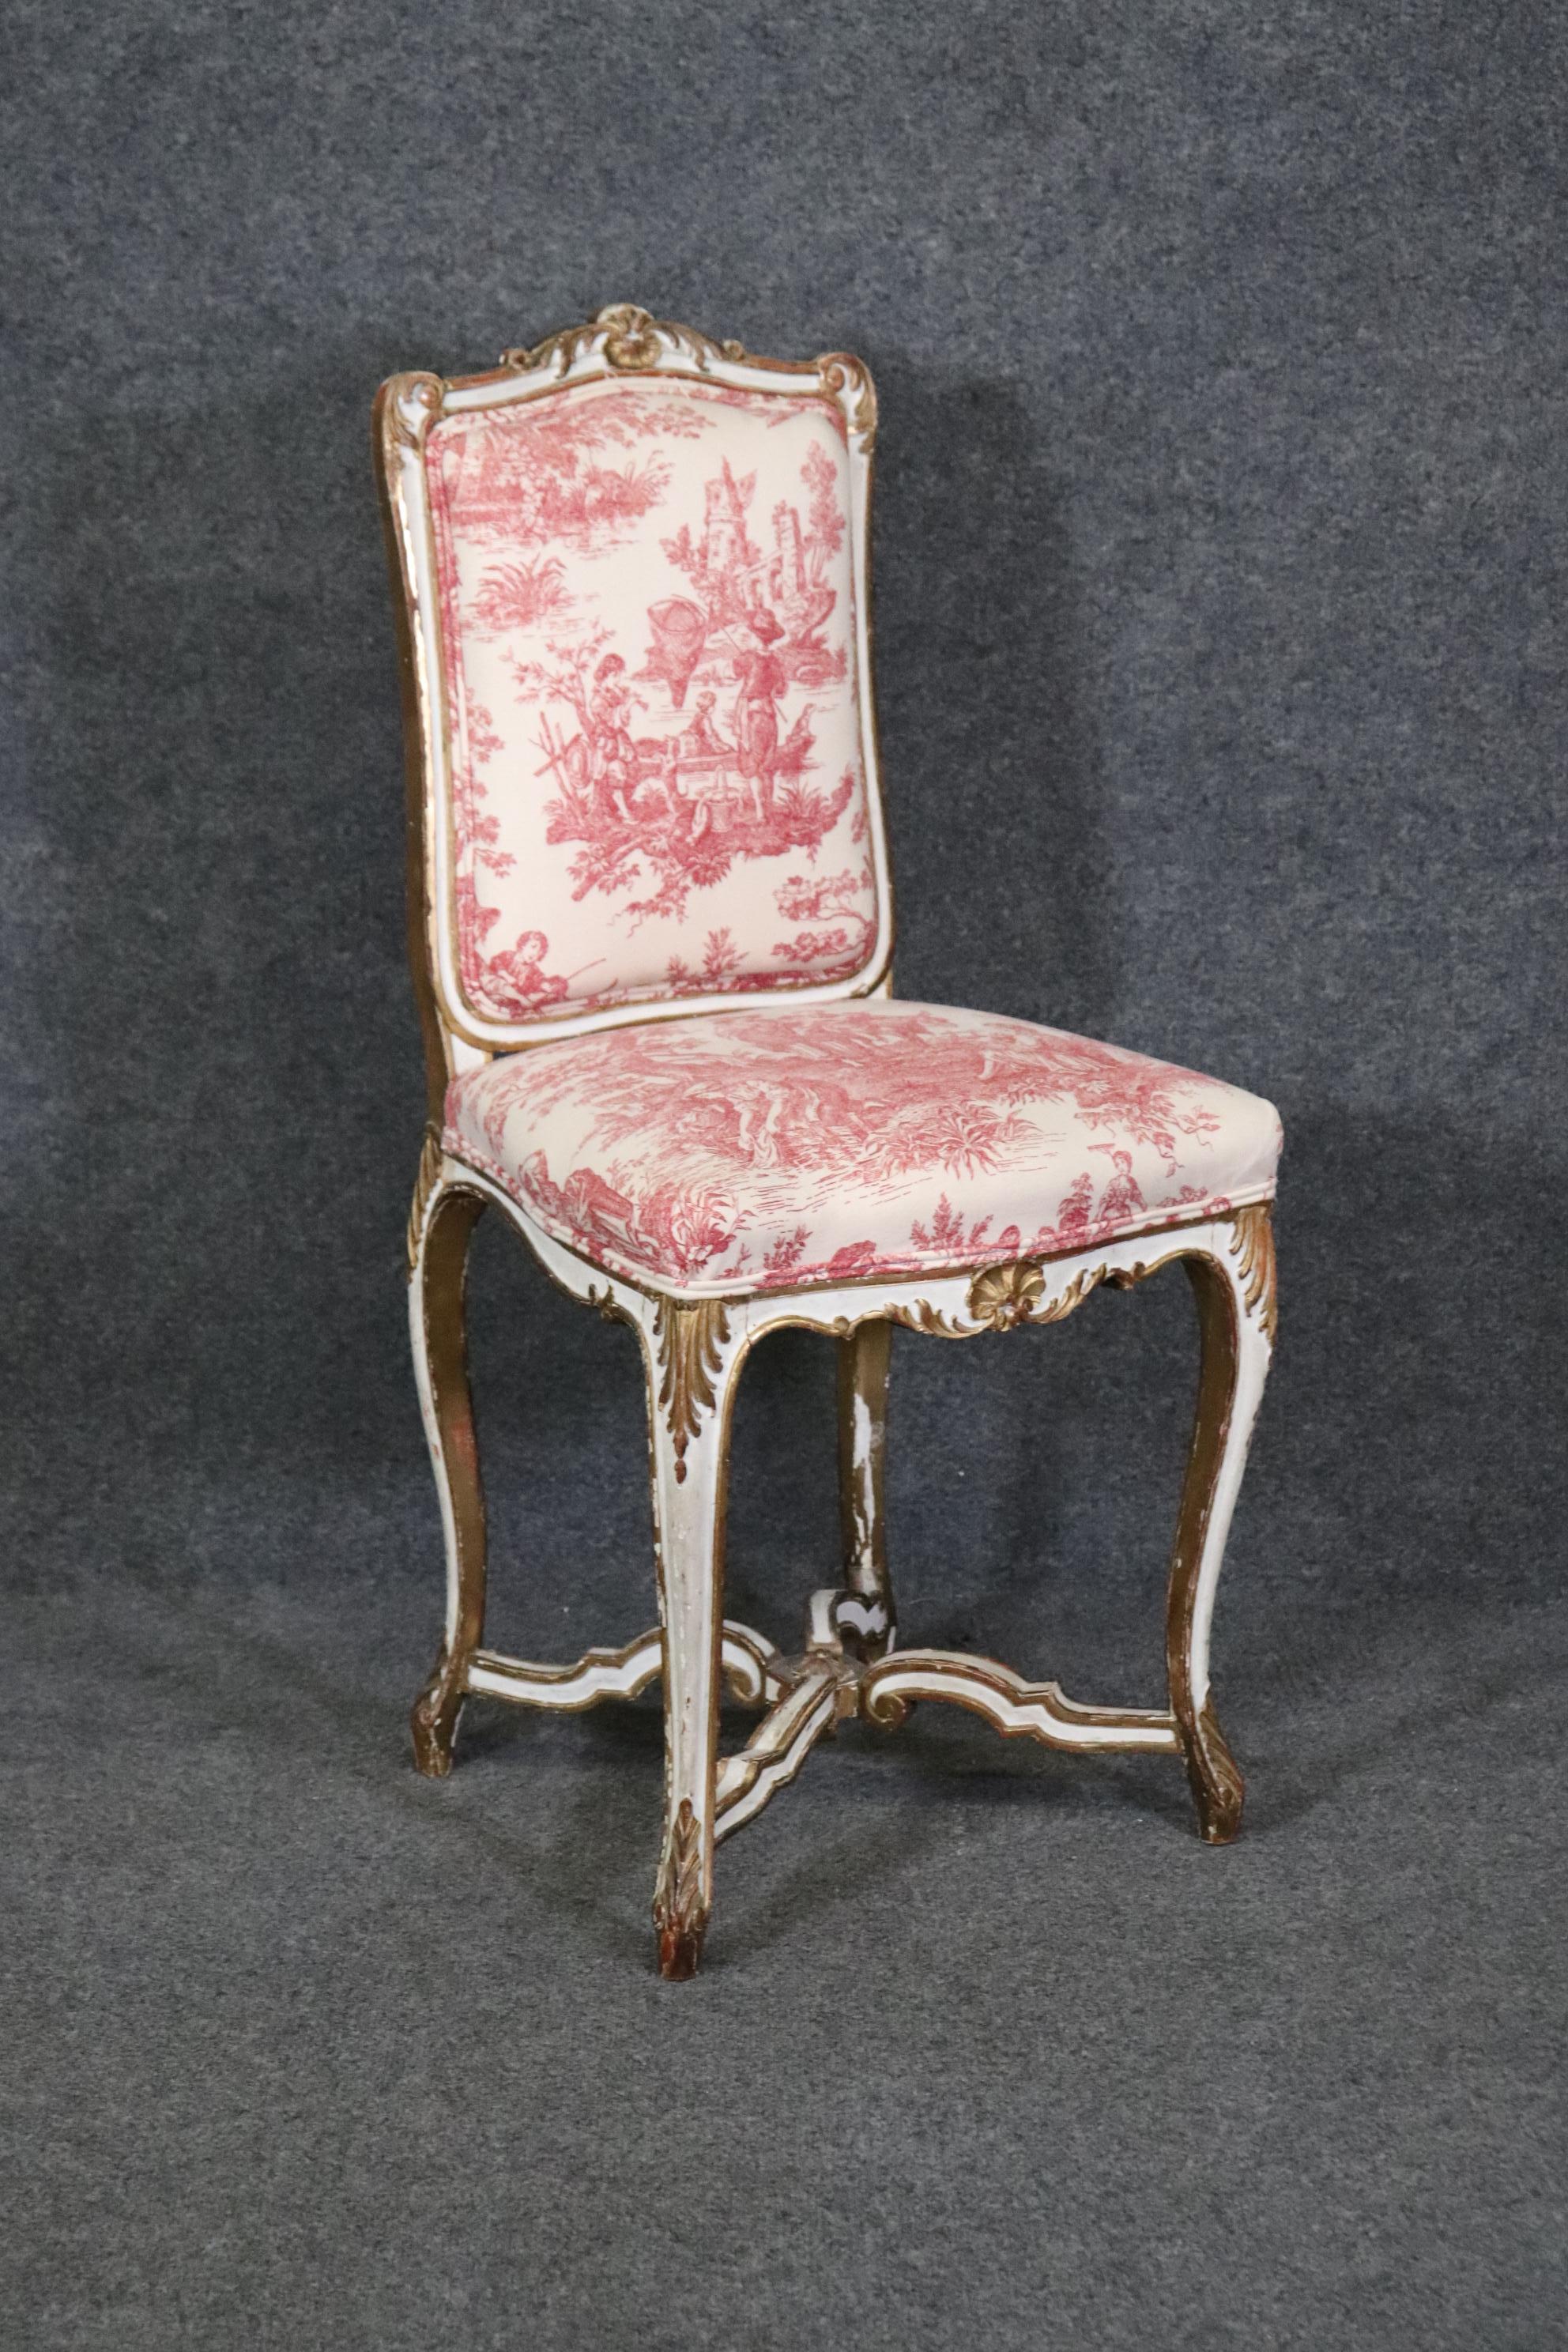 Dimensions- H: 36 1/4in W: 17 3/4in D: 16in SH: 20in 

This antique Louis XV style desk chair is made of the highest quality and is perfect for you and your home! If you look at the photos provided, you see the paint and gilt decoration, as well as